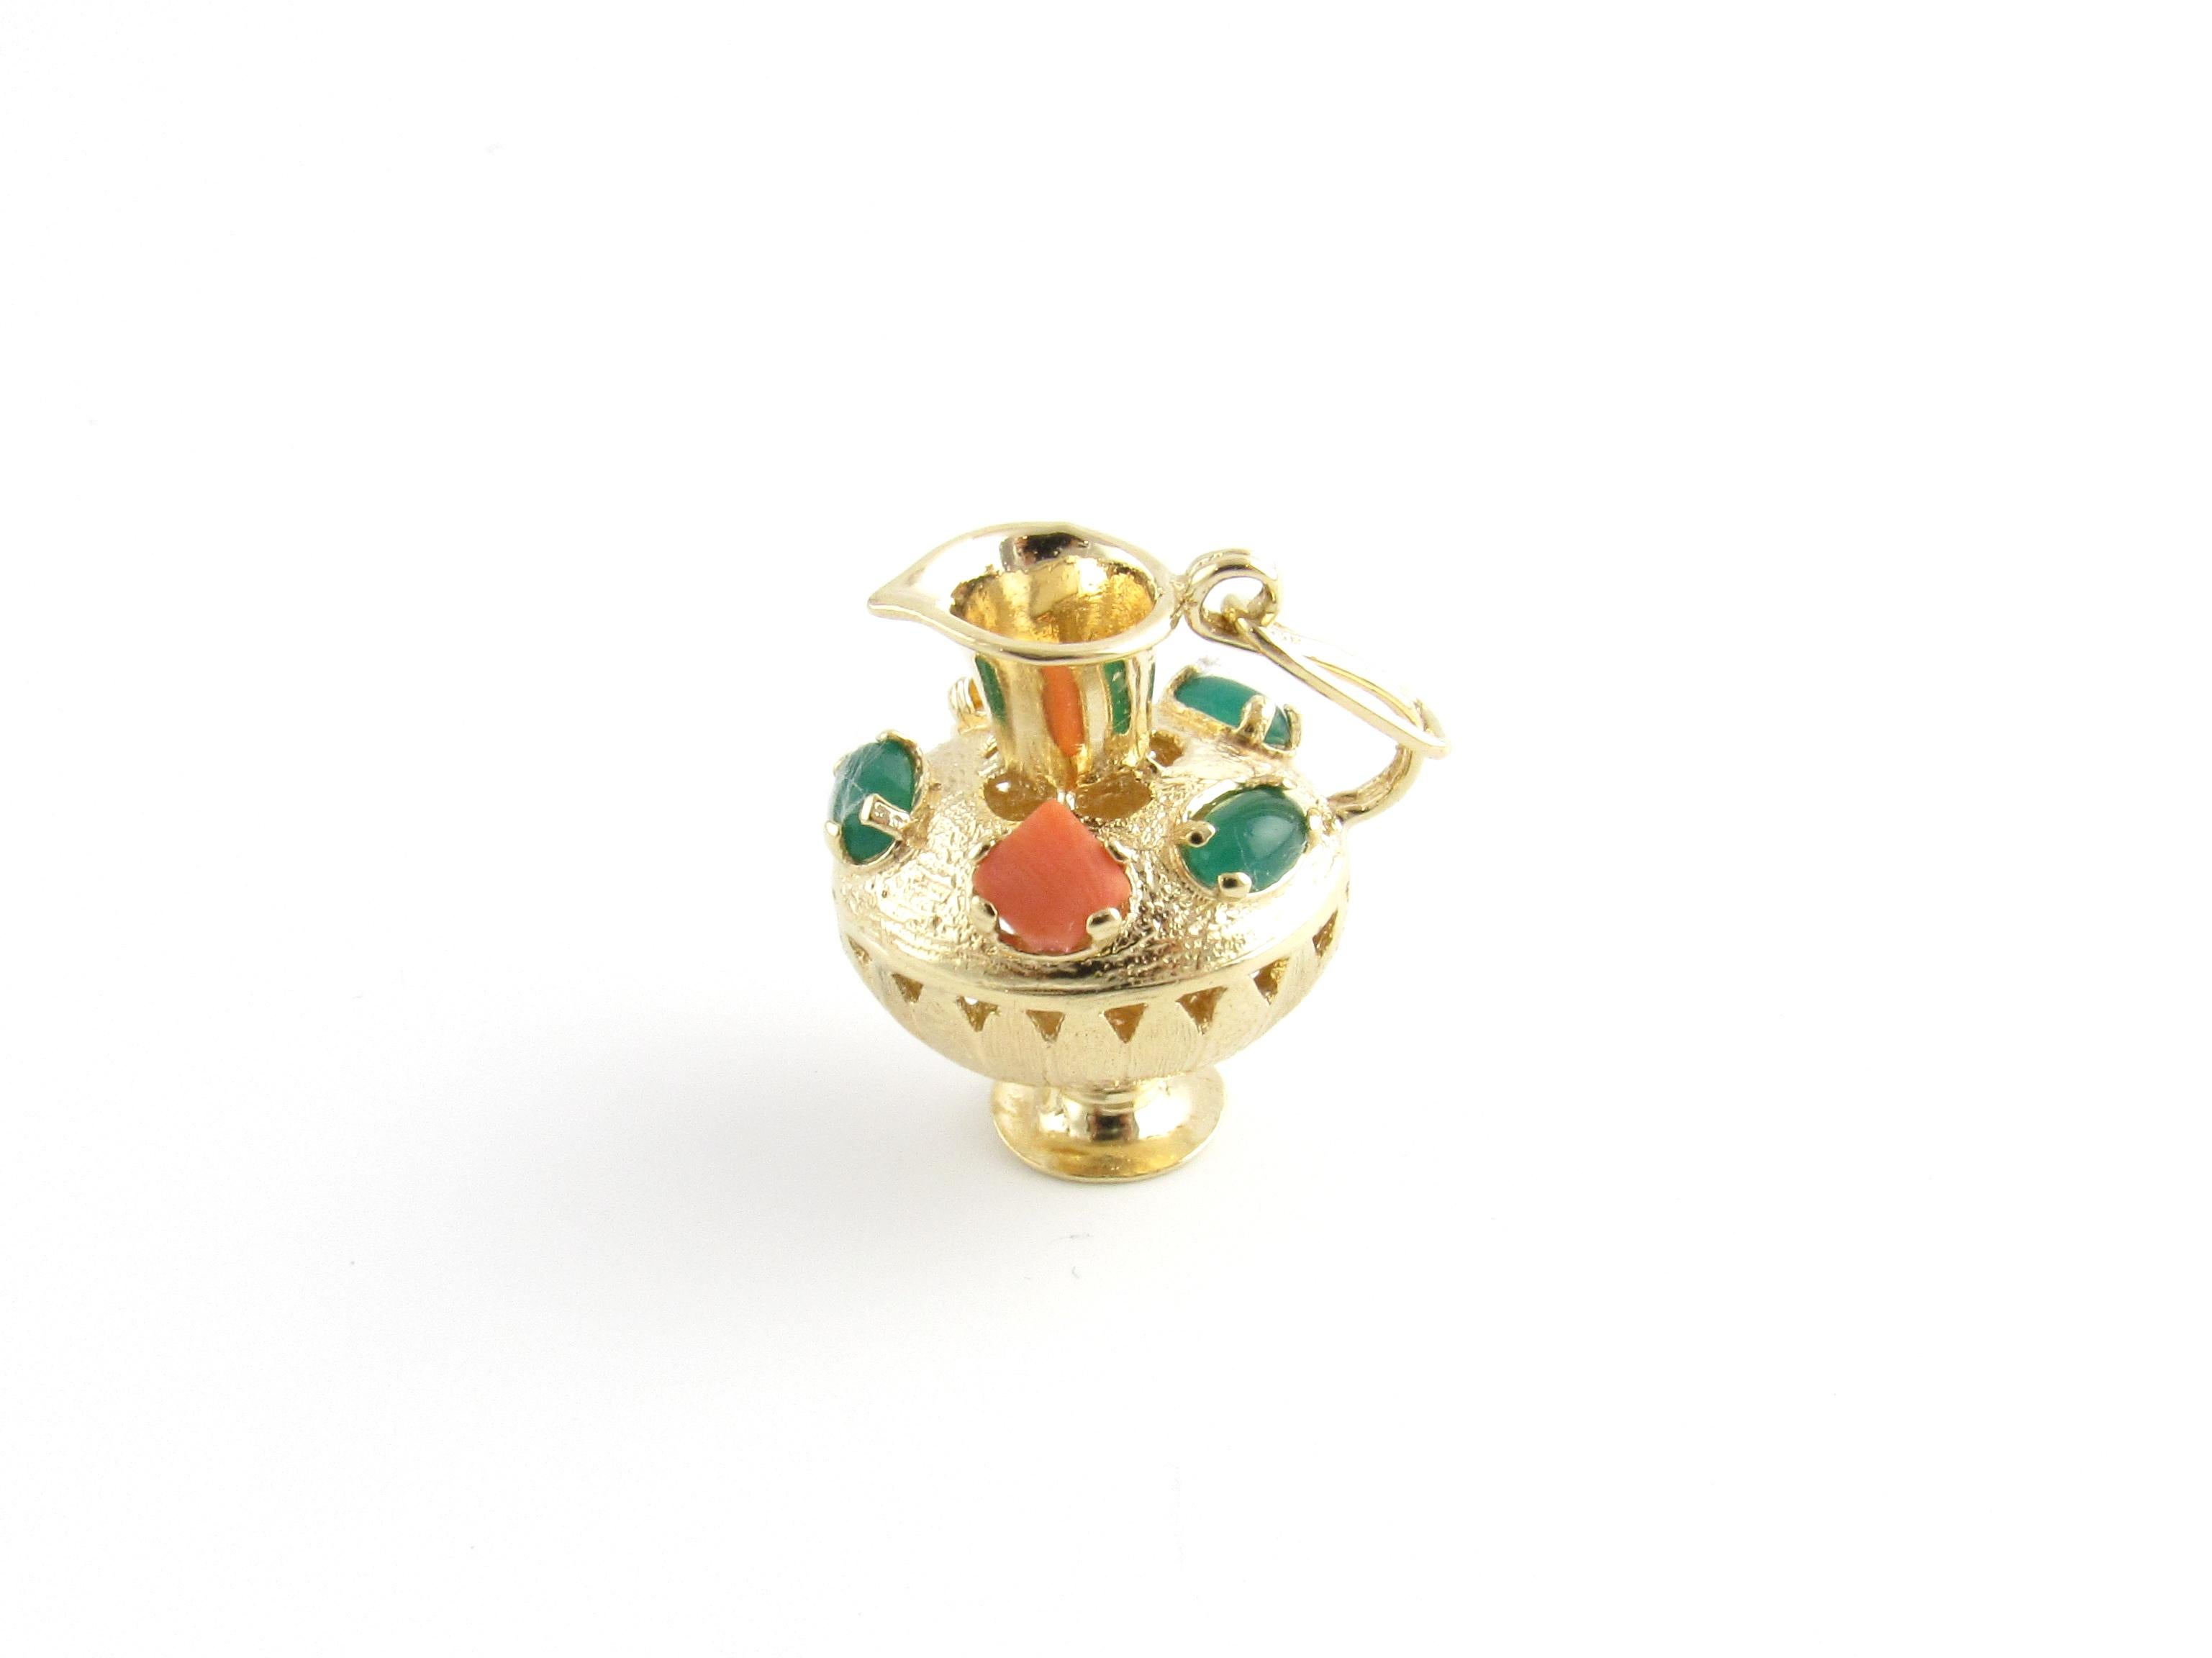 Vintage 14 Karat Yellow Gold and Gemstone Pitcher Charm

This stunning 3D charm features a miniature pitcher decorated with five gemstones (three jade, one citrine, one coral) set in beautifully detailed 14K yellow gold.

Size: 27 mm x 24